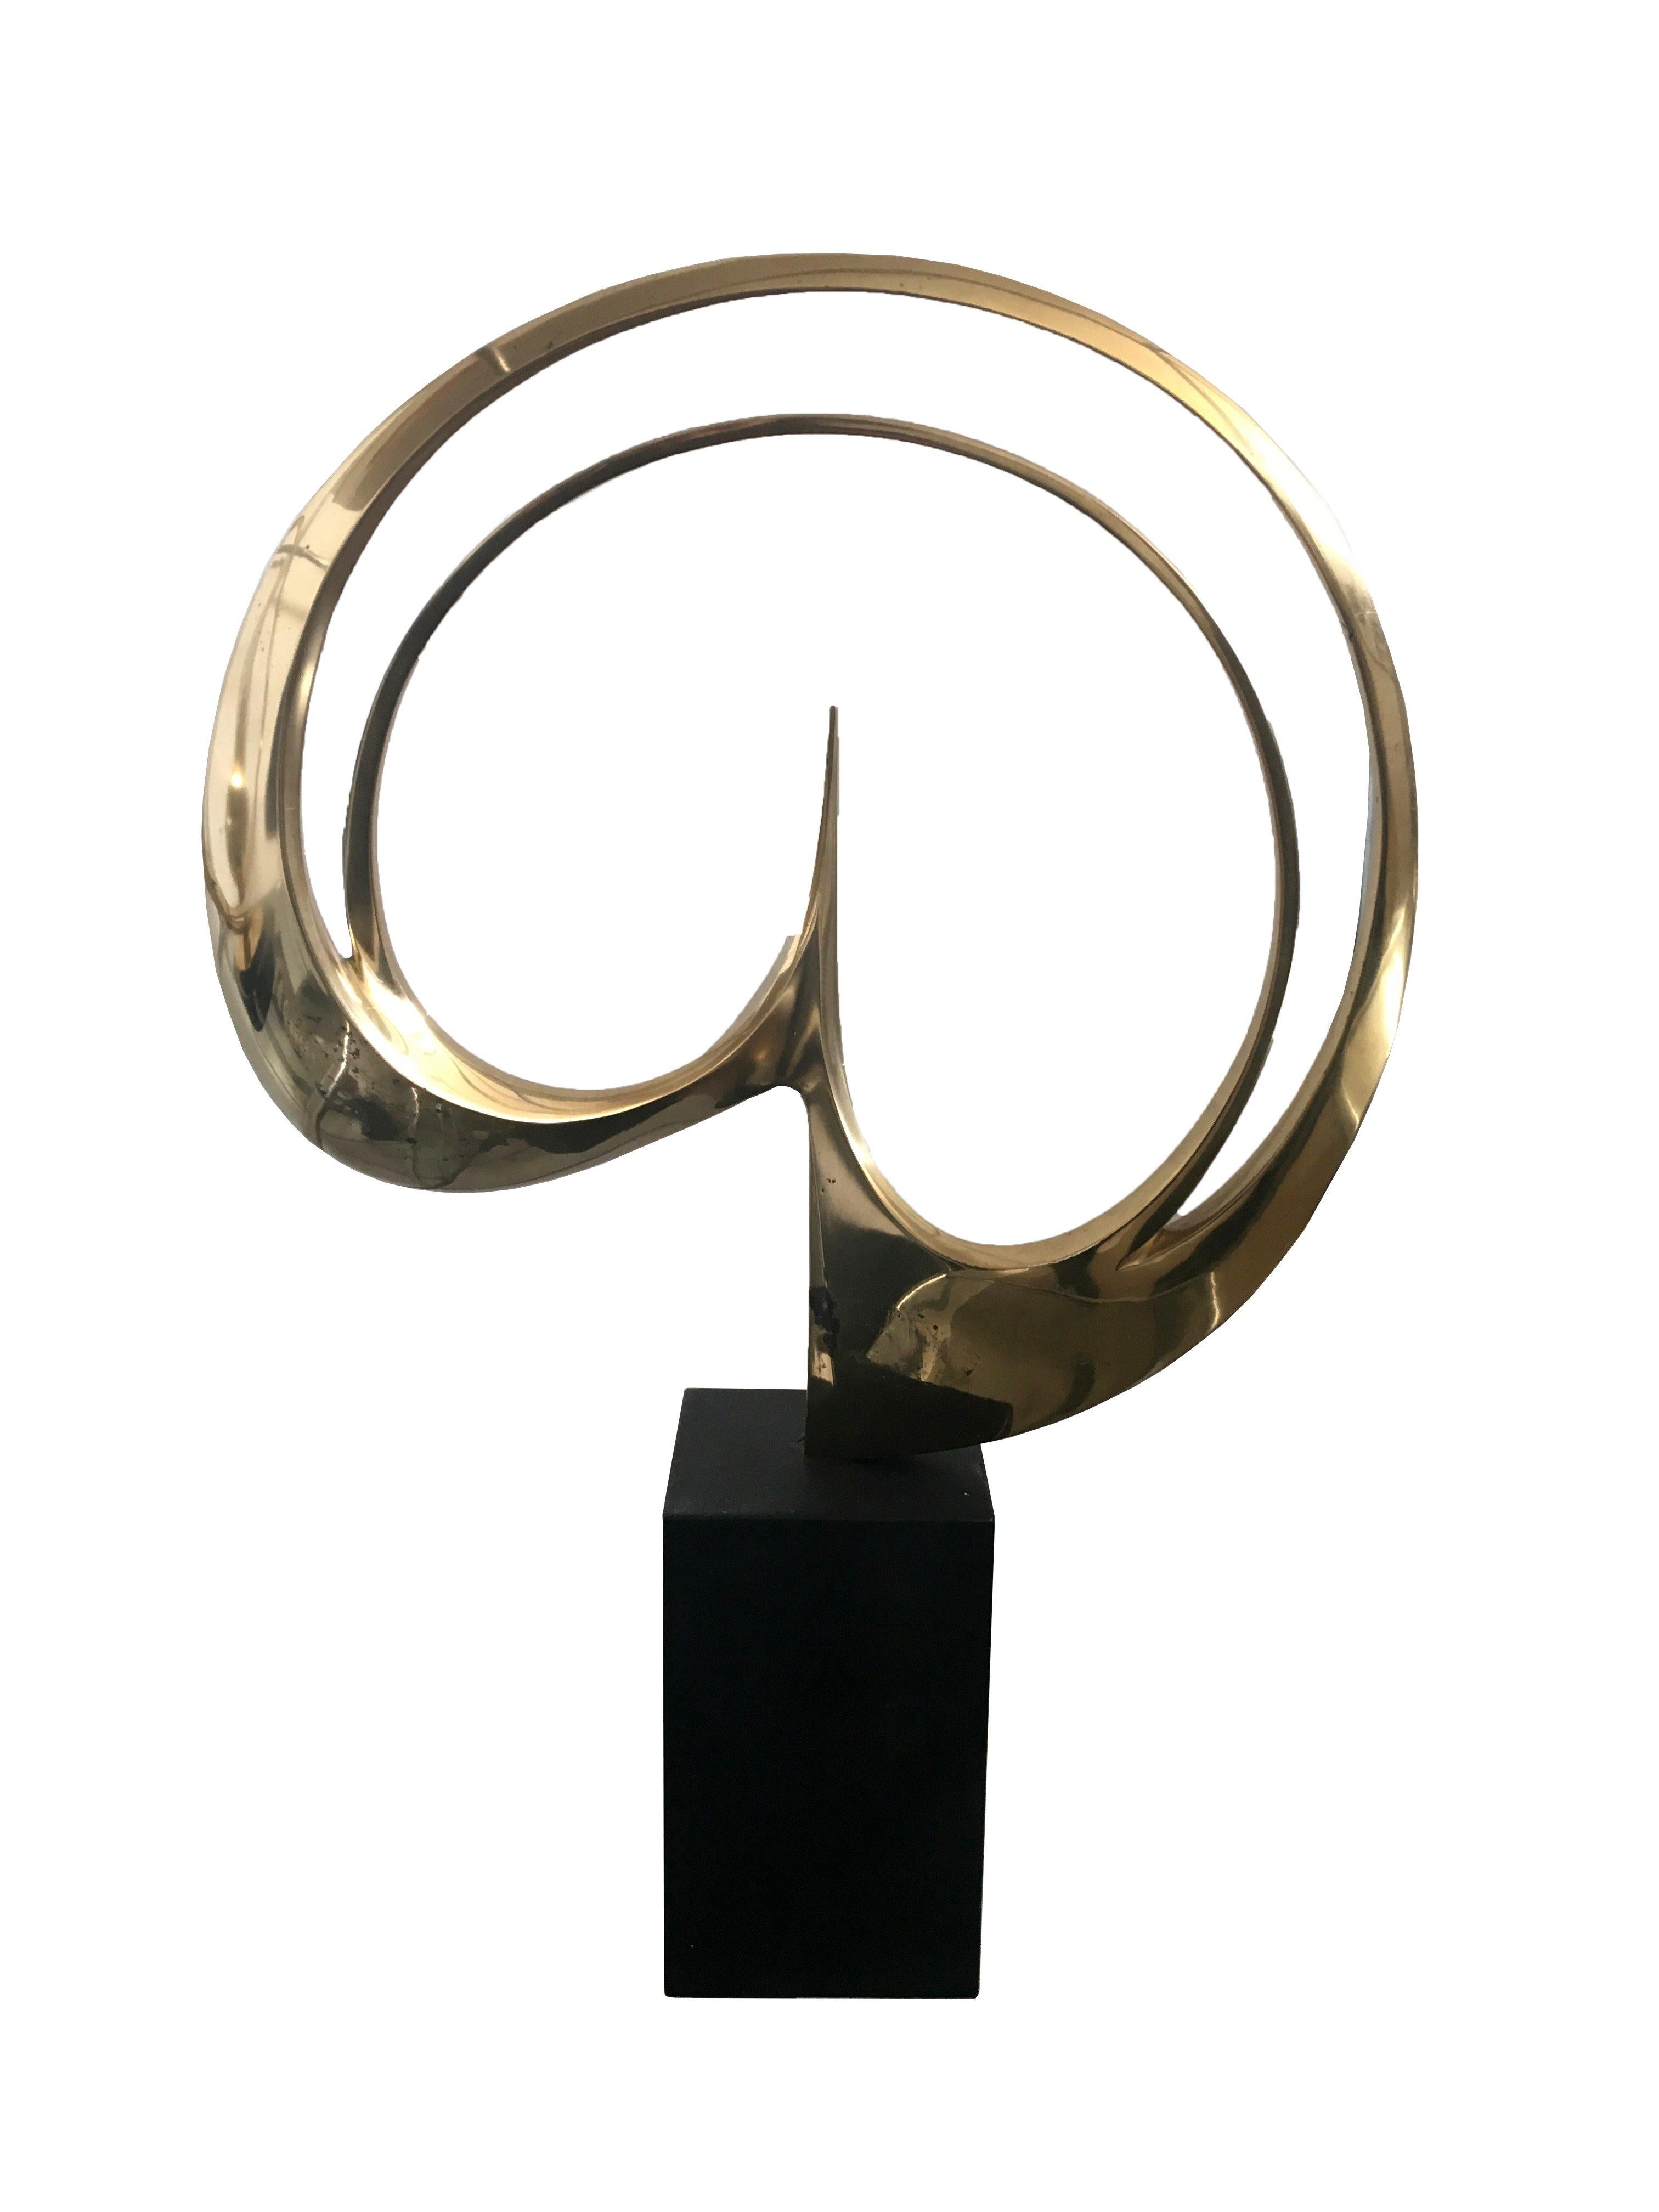 1974 Italy Stopped Rounded Sphere Carmelo Cappello Abstract Bronze Sculpture For Sale 2